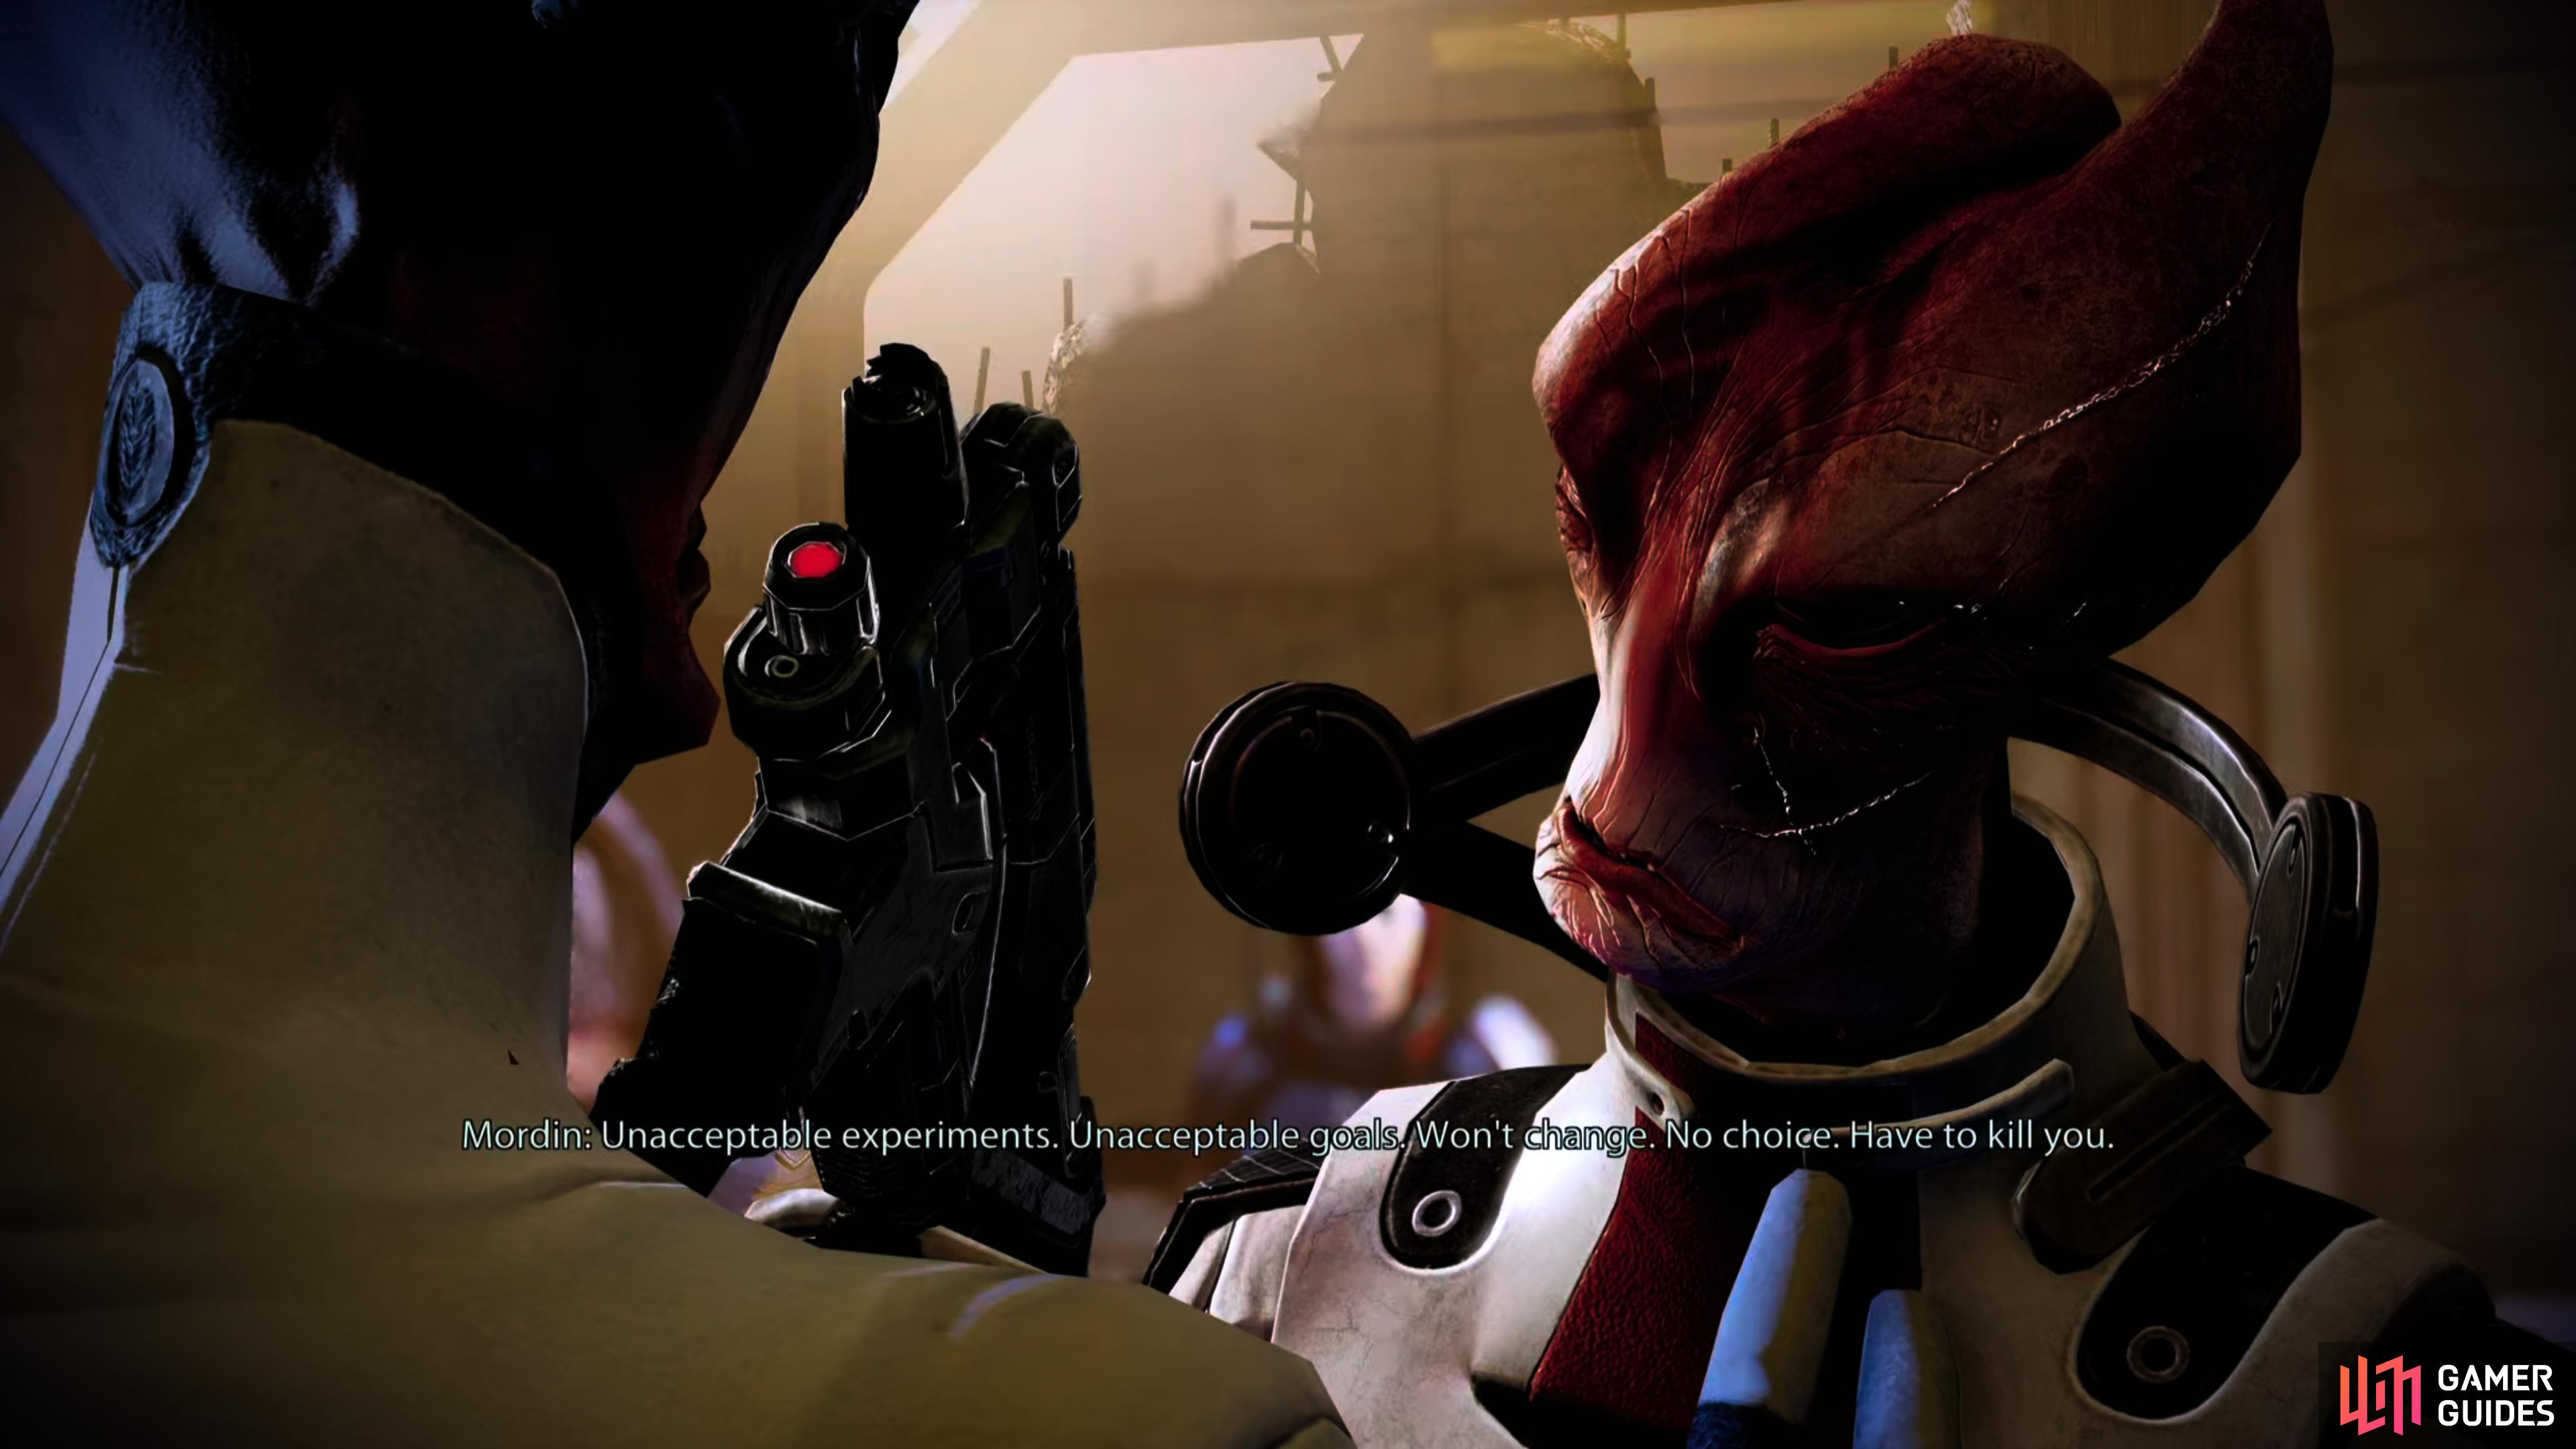 then confront Maelon, where you can influence Mordin's decision.